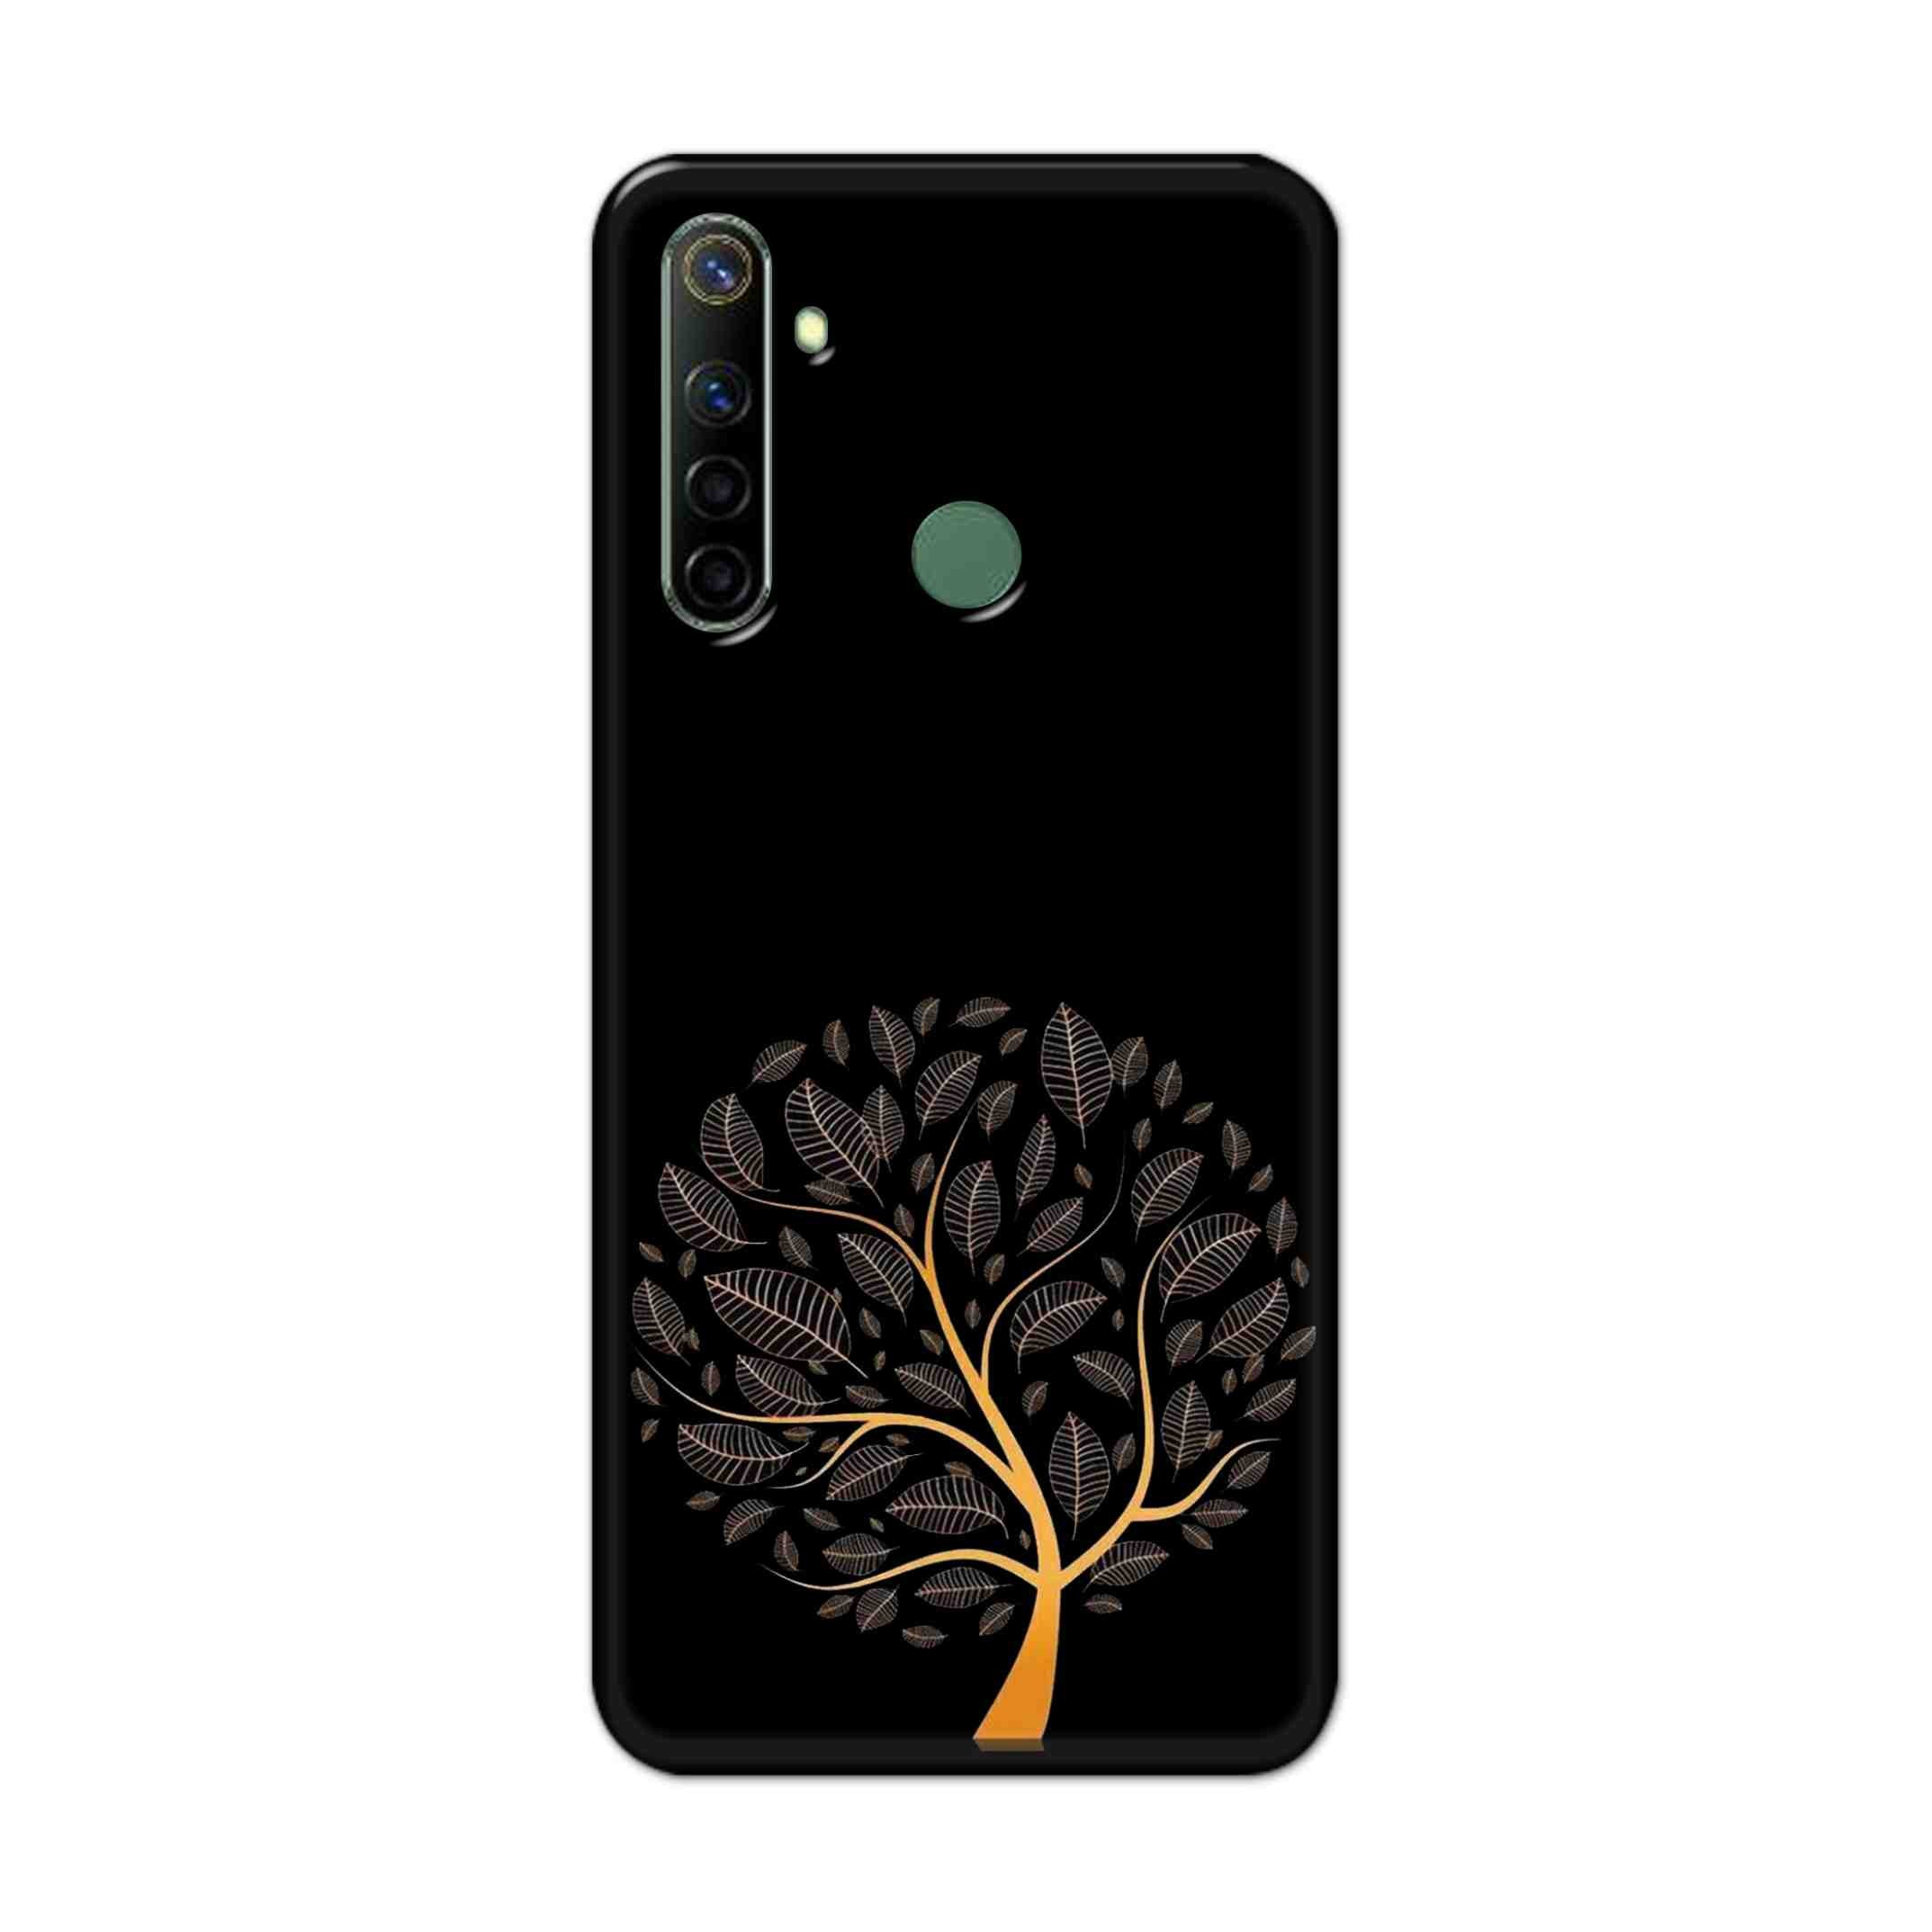 Buy Golden Tree Hard Back Mobile Phone Case Cover For Realme Narzo 10a Online